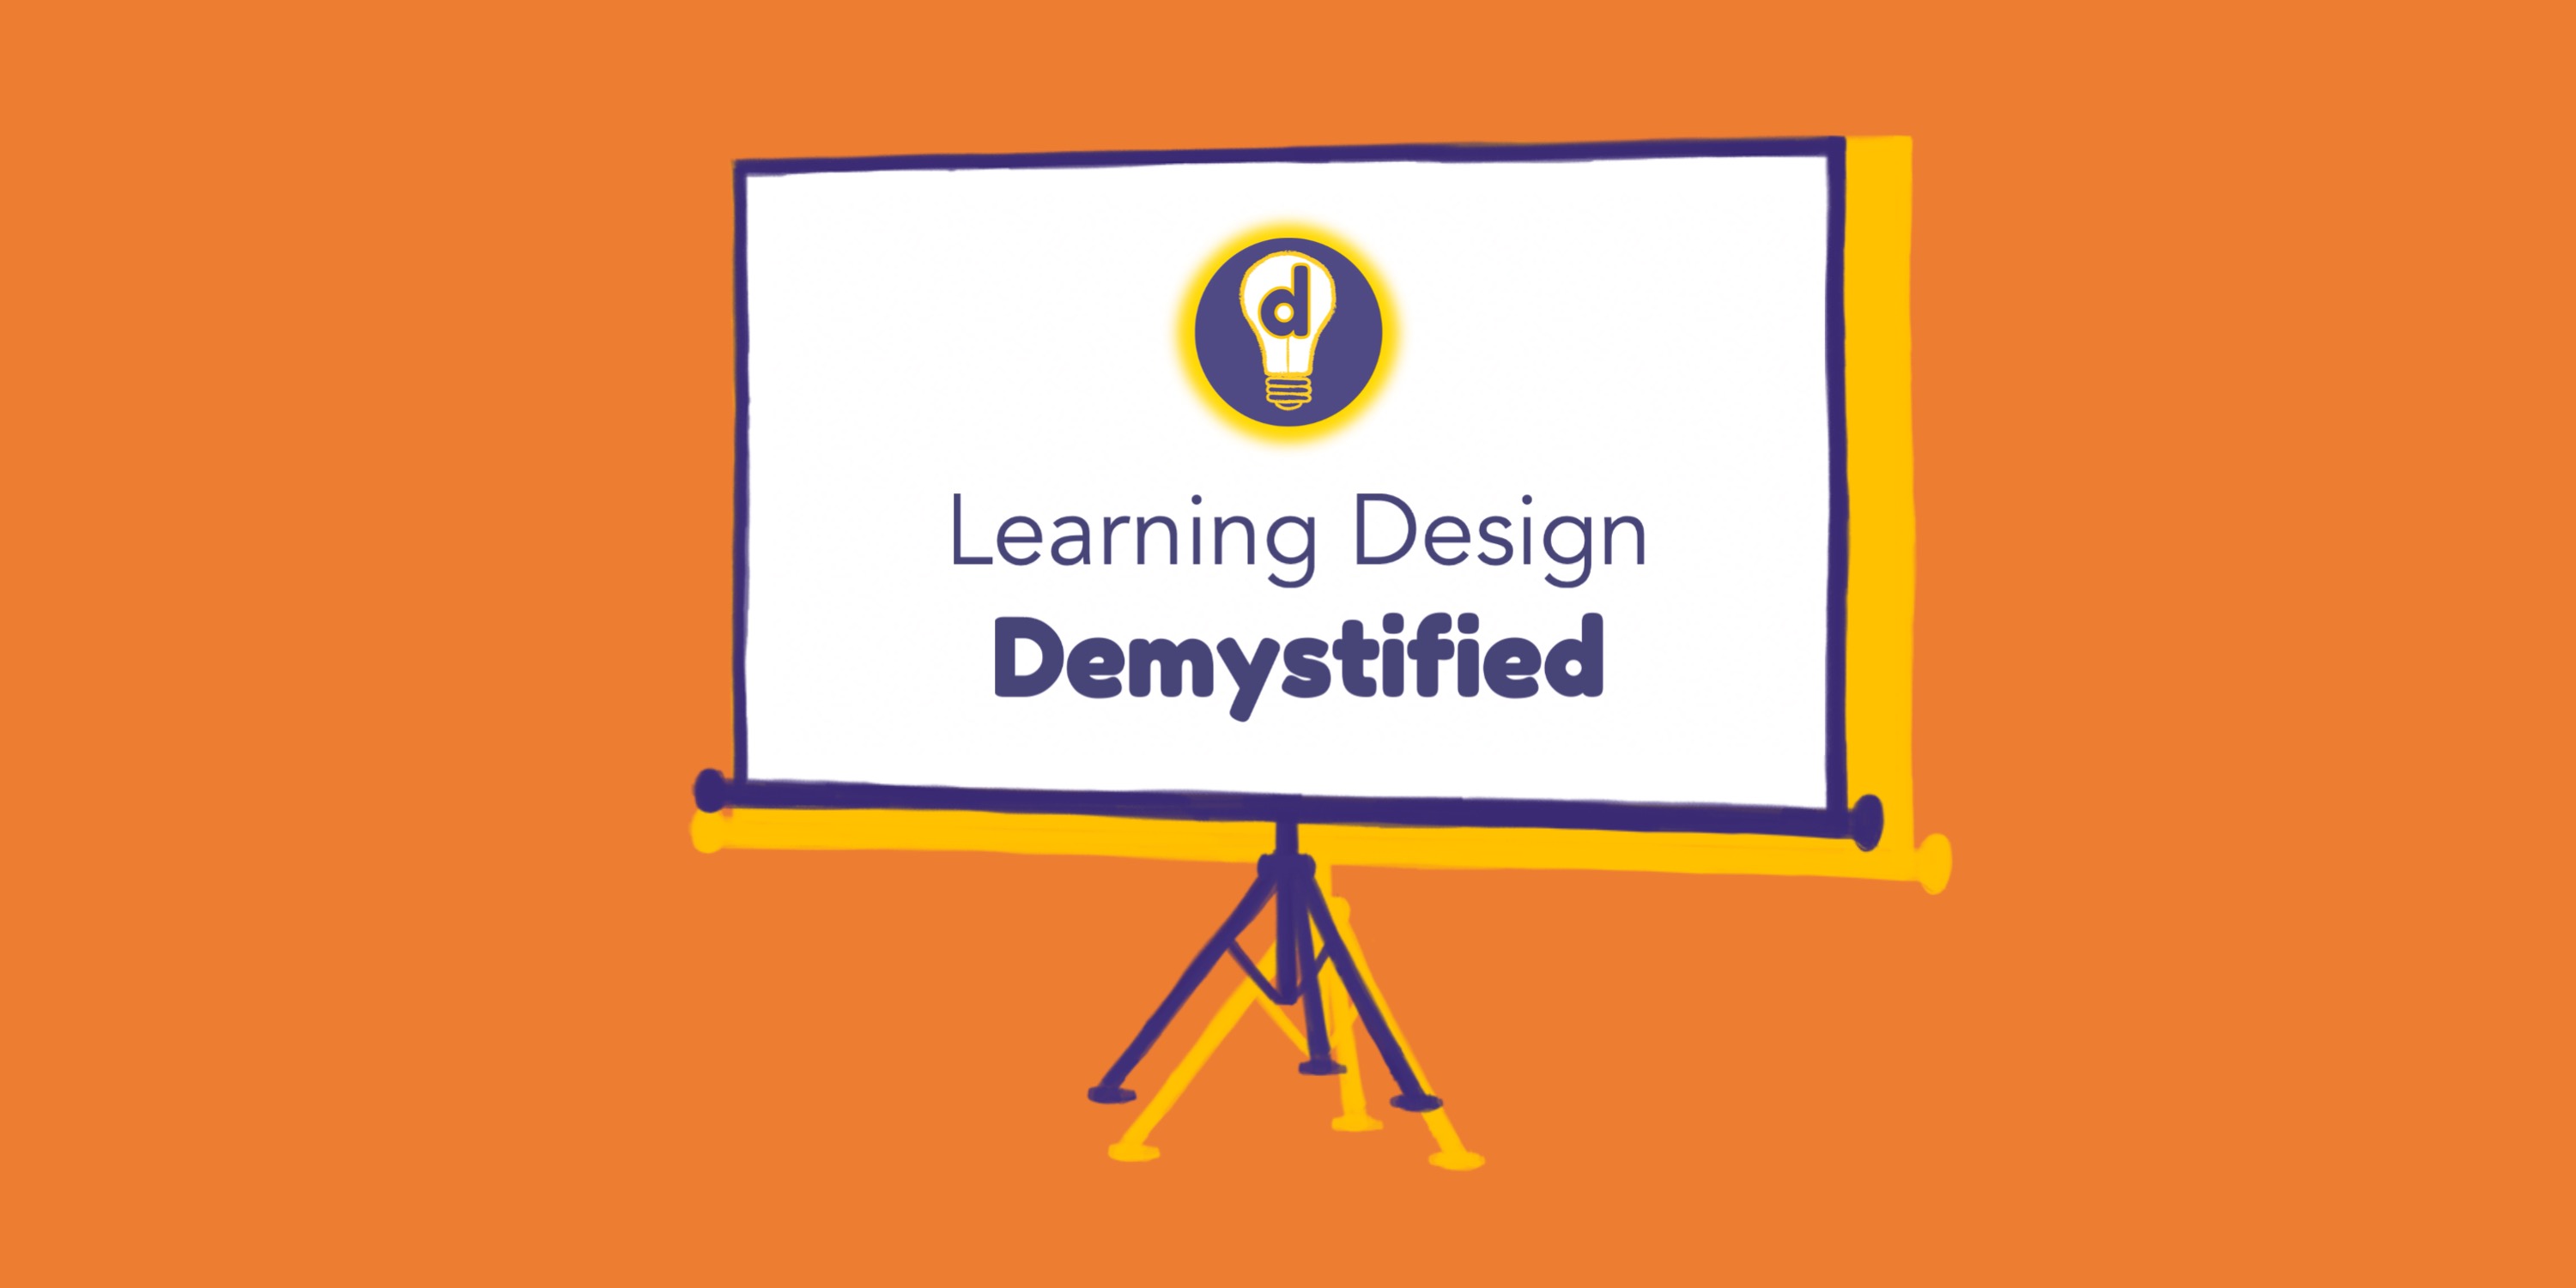 Ding! Learning Design Demystified